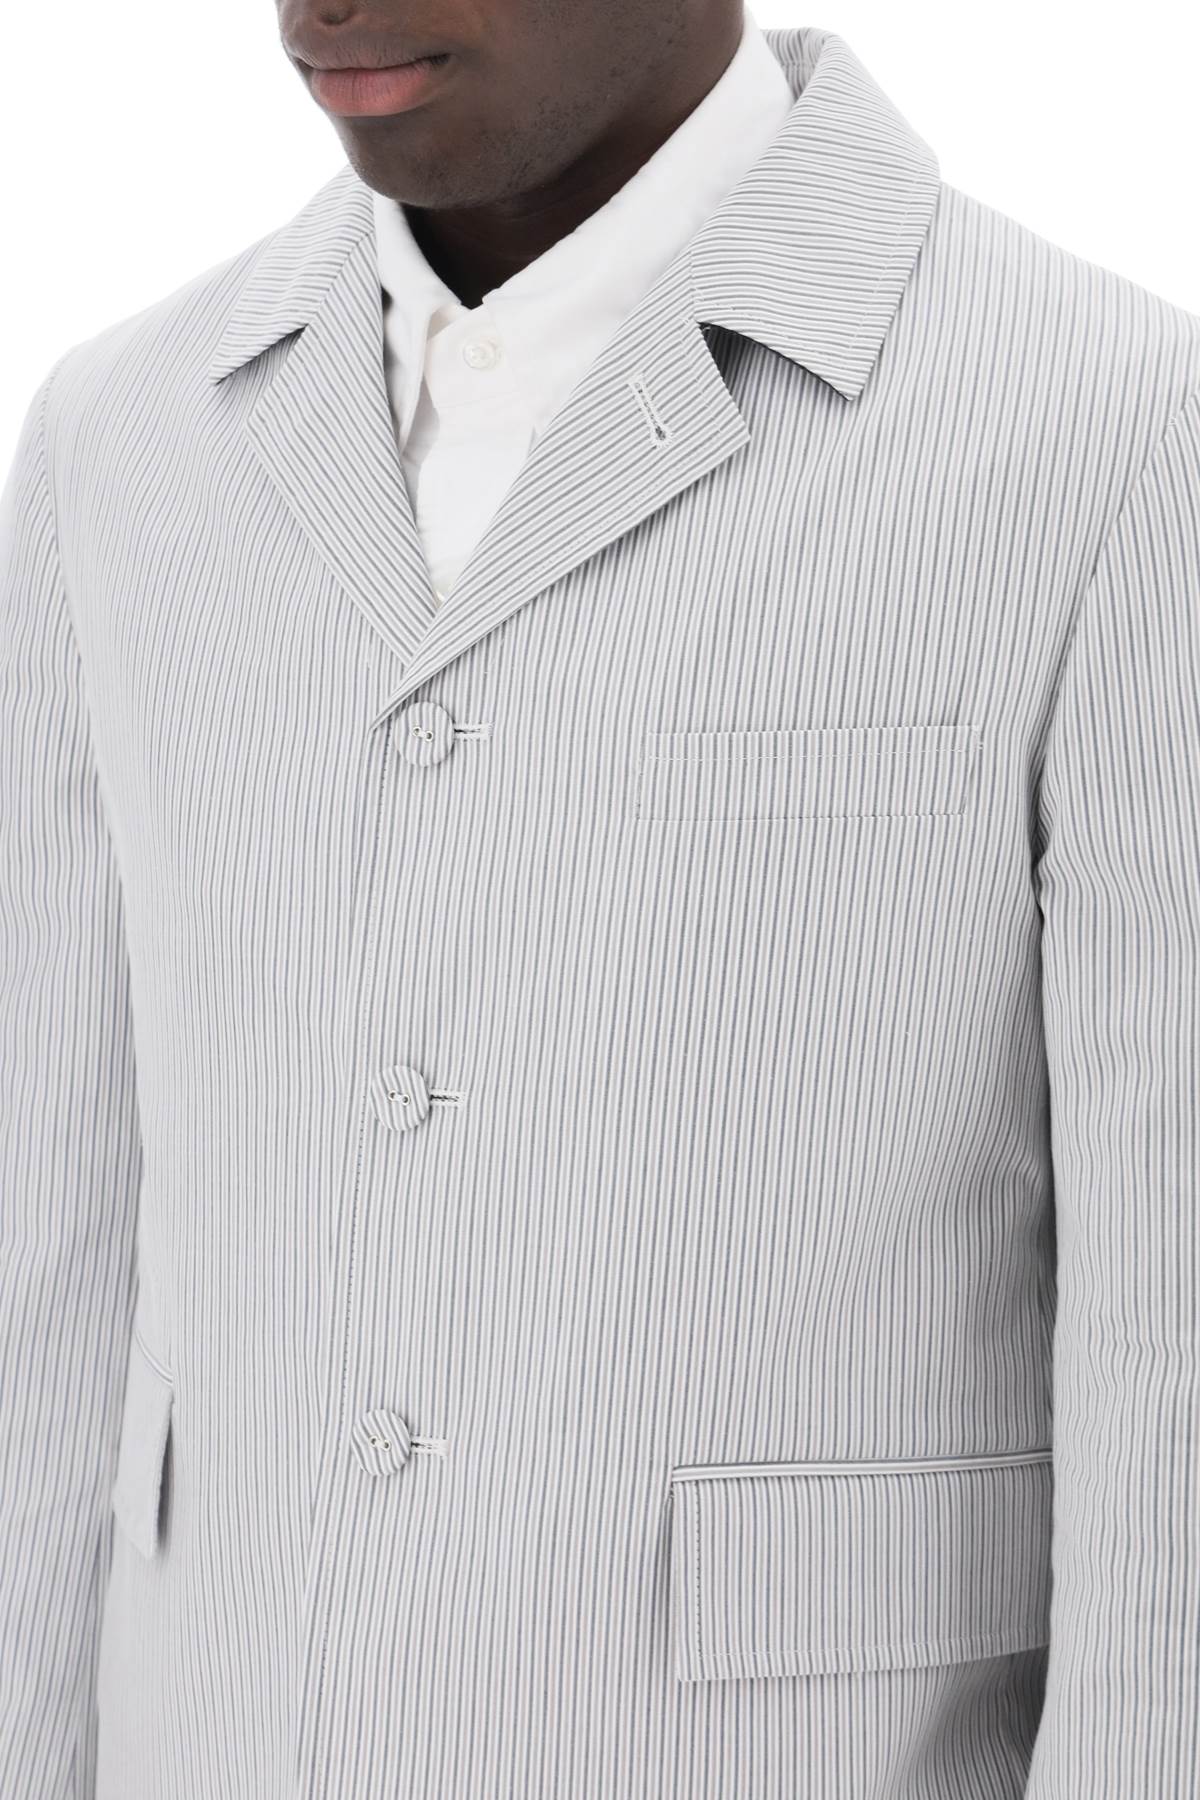 Thom browne striped deconstructed jacket-3